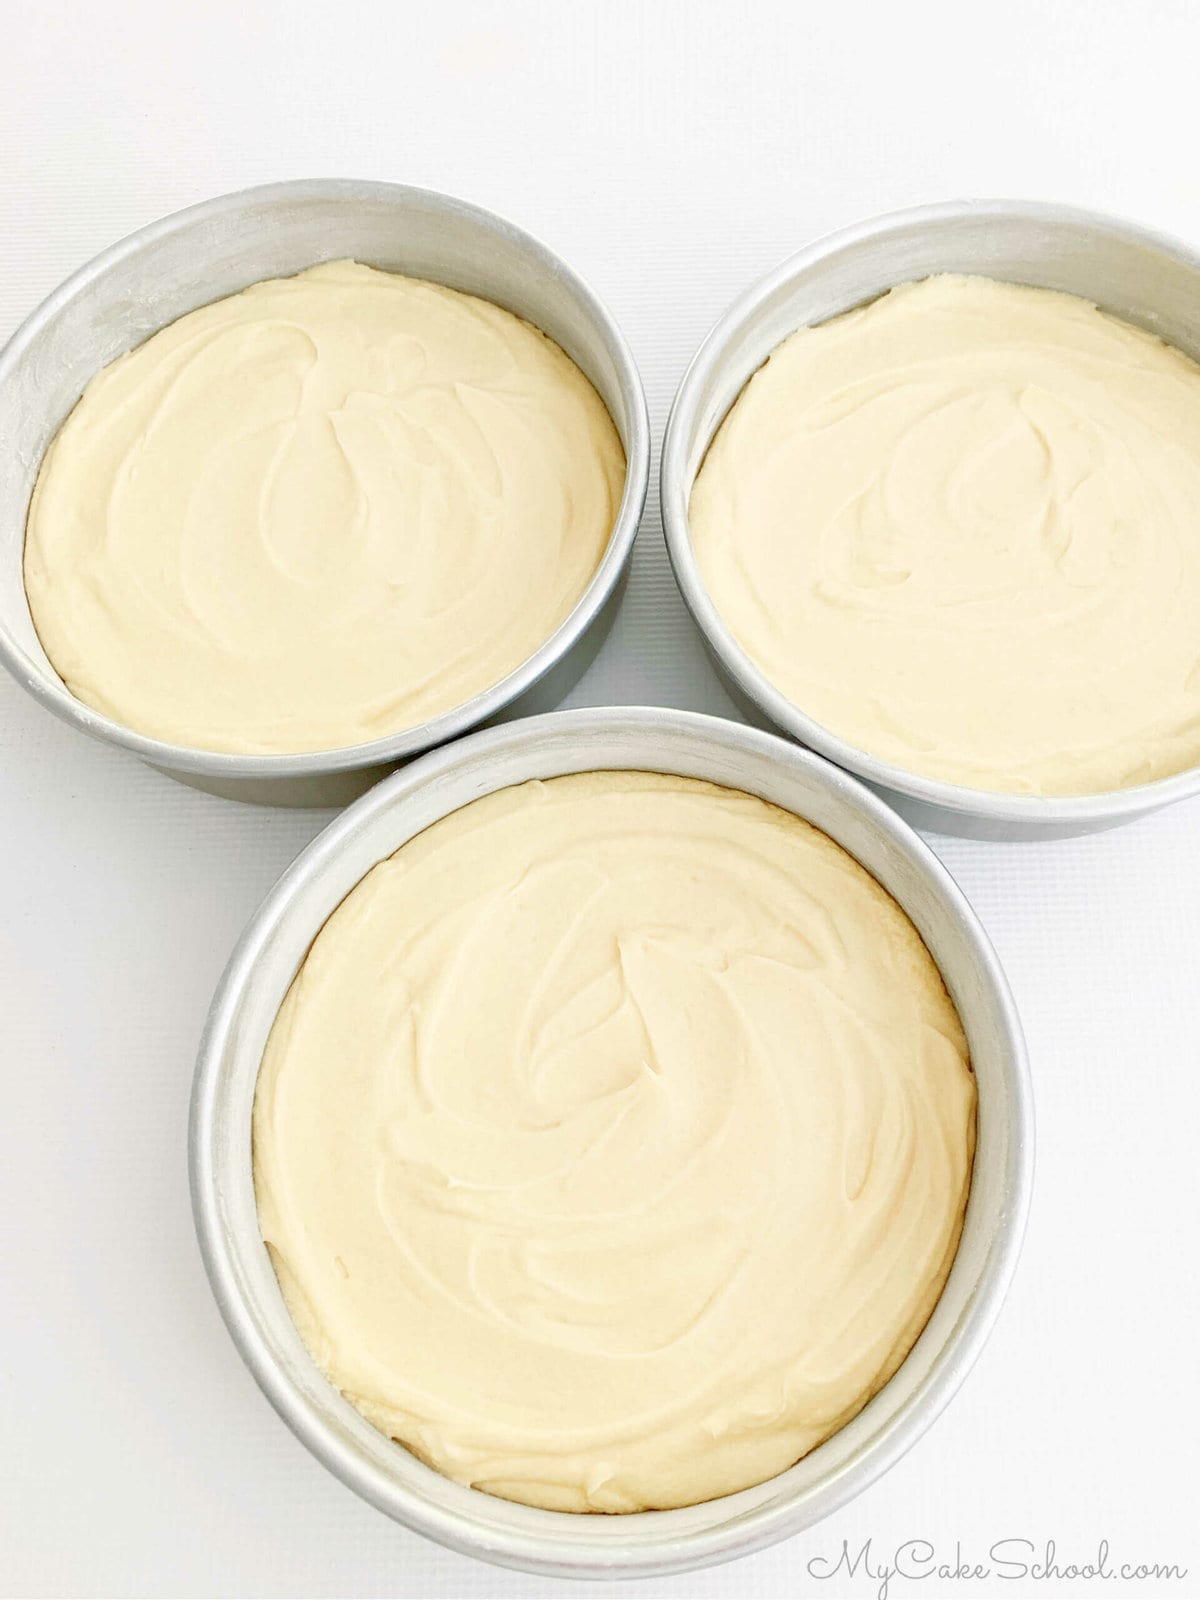 Three 8 inch round cake pans filled with pound cake batter